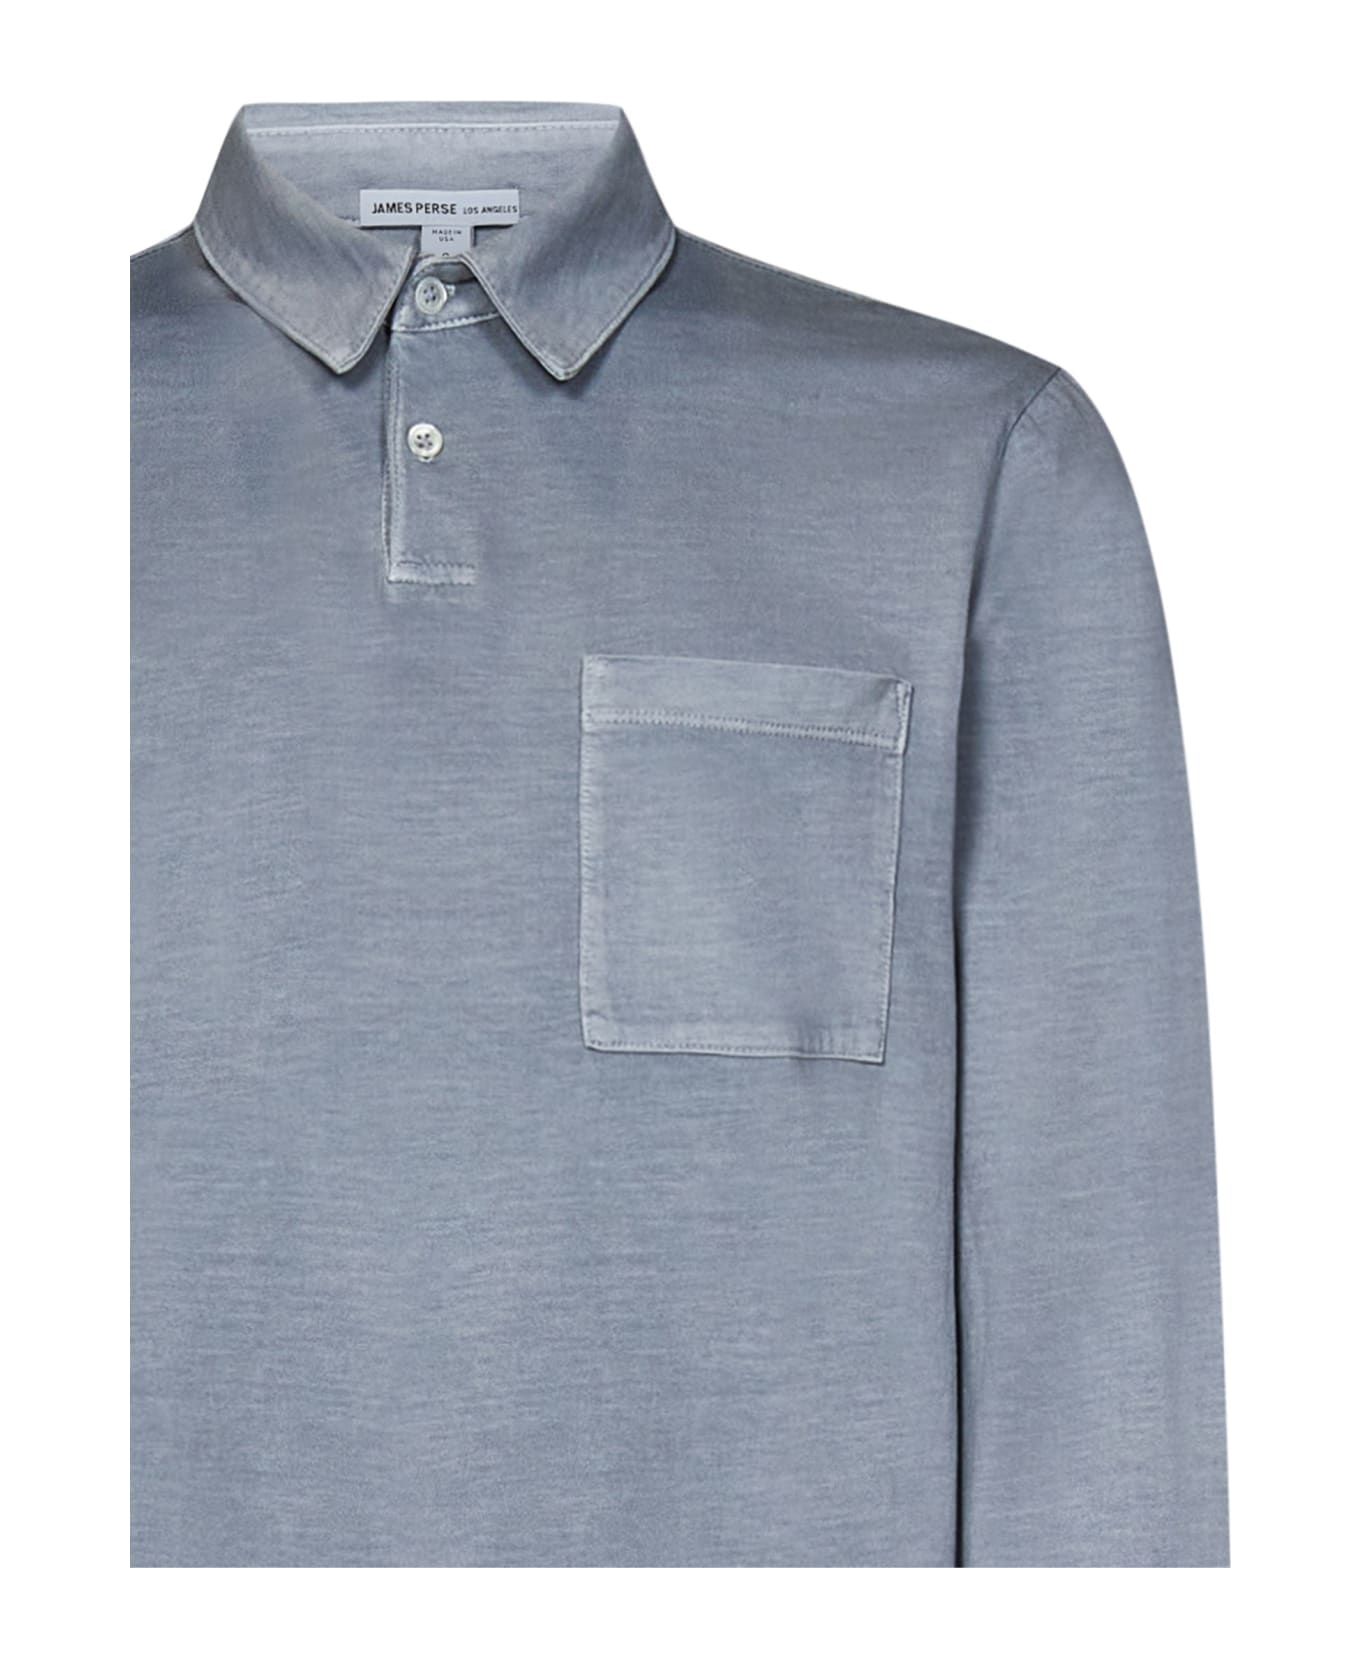 James Perse Polo Shirt - Grey ポロシャツ